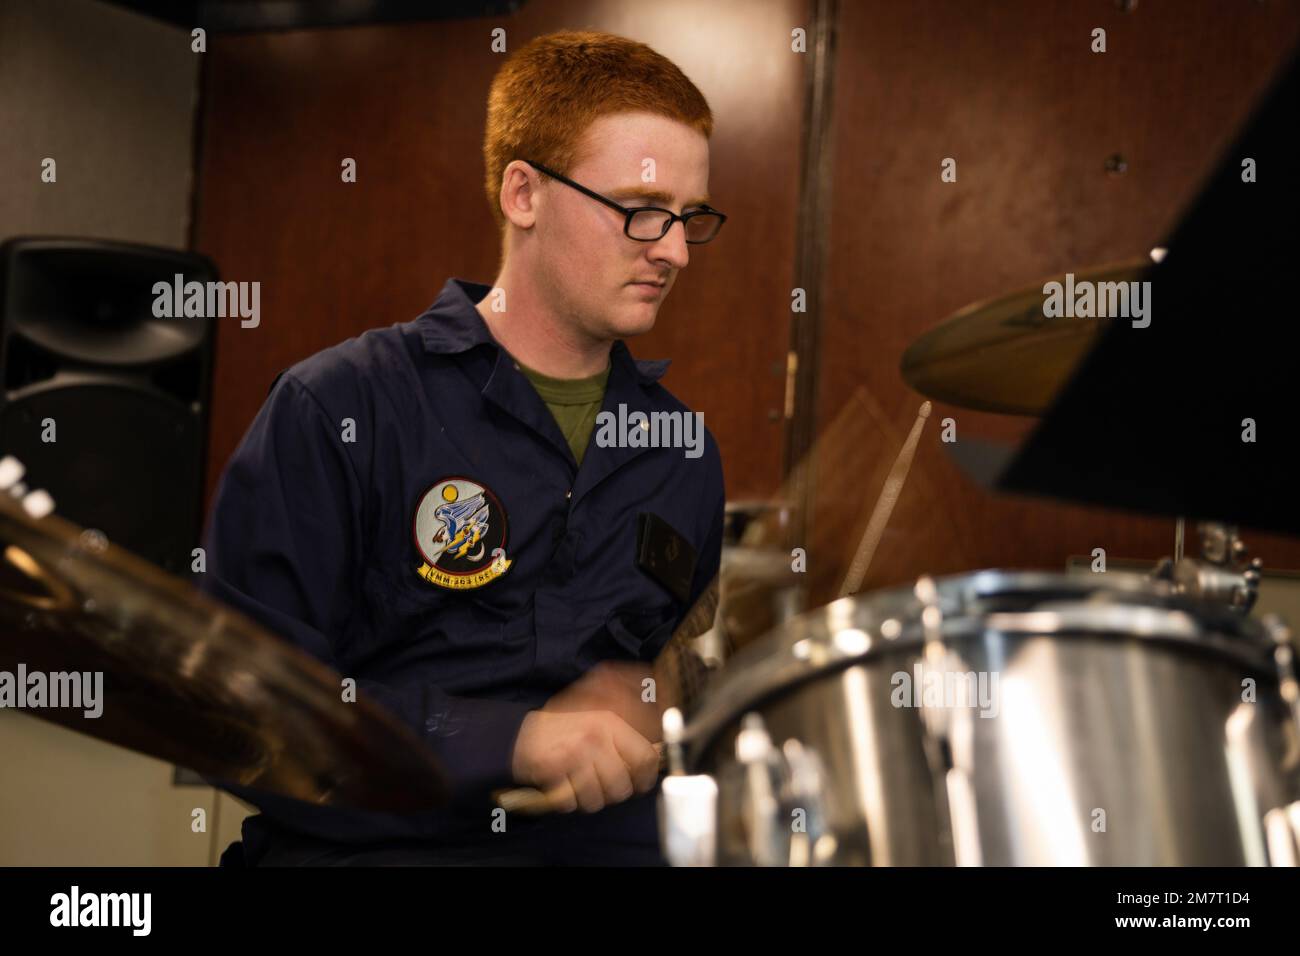 ATLANTIC OCEAN (May 12, 2022) – U.S. Marine Corps Lance Cpl. Jonathan Clay plays drums during the chapel’s band-practice aboard the Wasp-class amphibious assault ship USS Kearsarge (LHD 3), May 12, 2022. Kearsarge, flagship of the Kearsarge ARG/MEU team, is on a scheduled deployment under the command and control of Task Force 61/2 while operating in U.S. Sixth Fleet in support of U.S., Allied and partner interests in Europe and Africa. Stock Photo